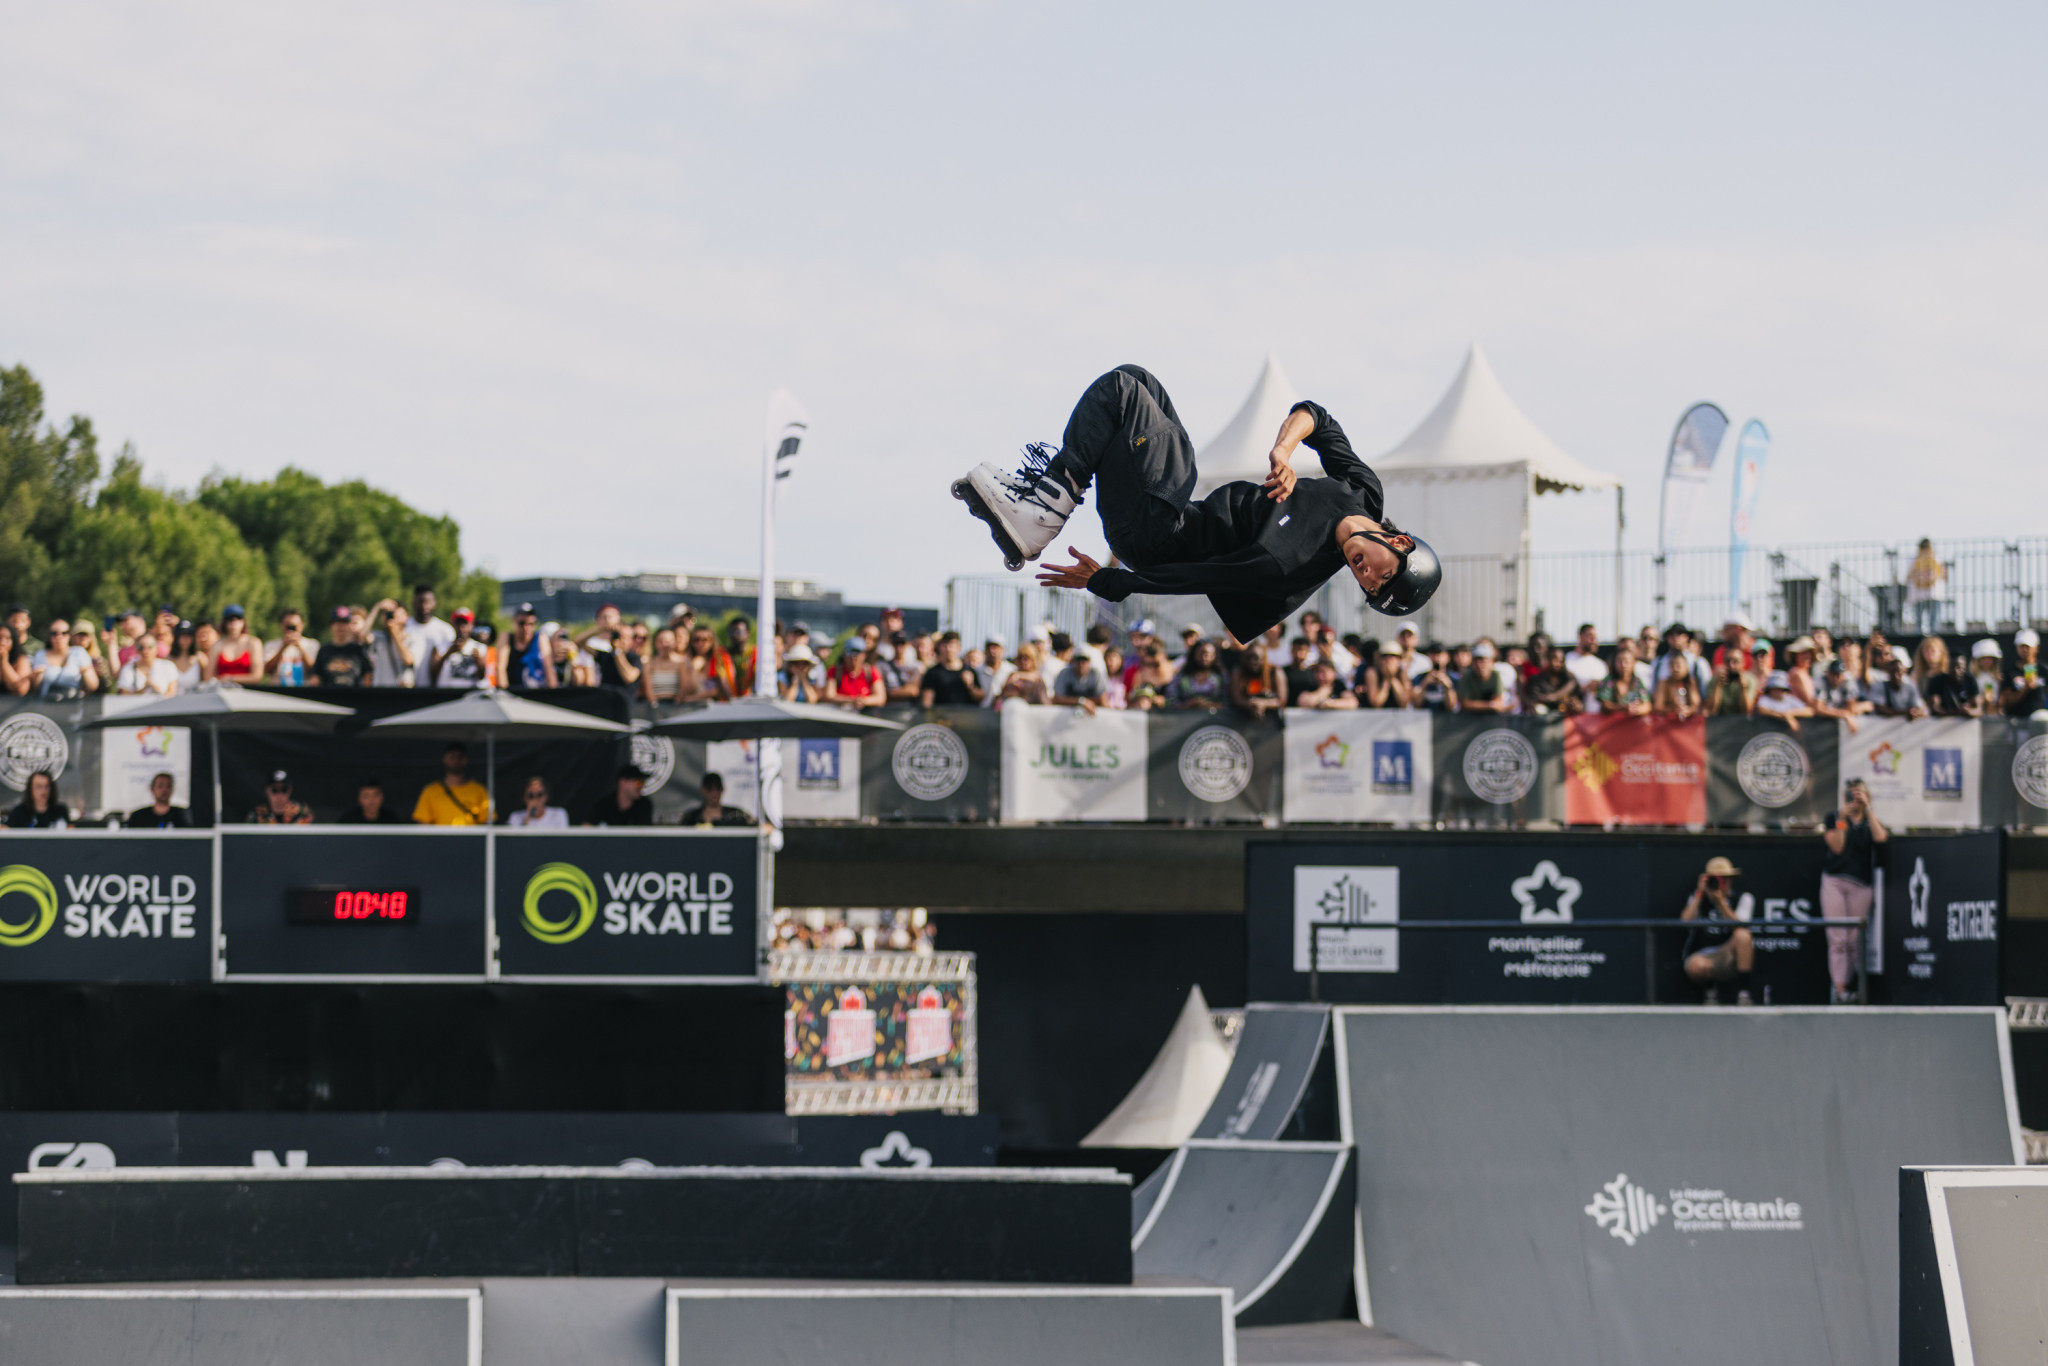 World Skate sports director Francesco Zangarini hopes to see one of scooter or roller freestyle at Los Angeles 2028 ©Hurricane - FISE